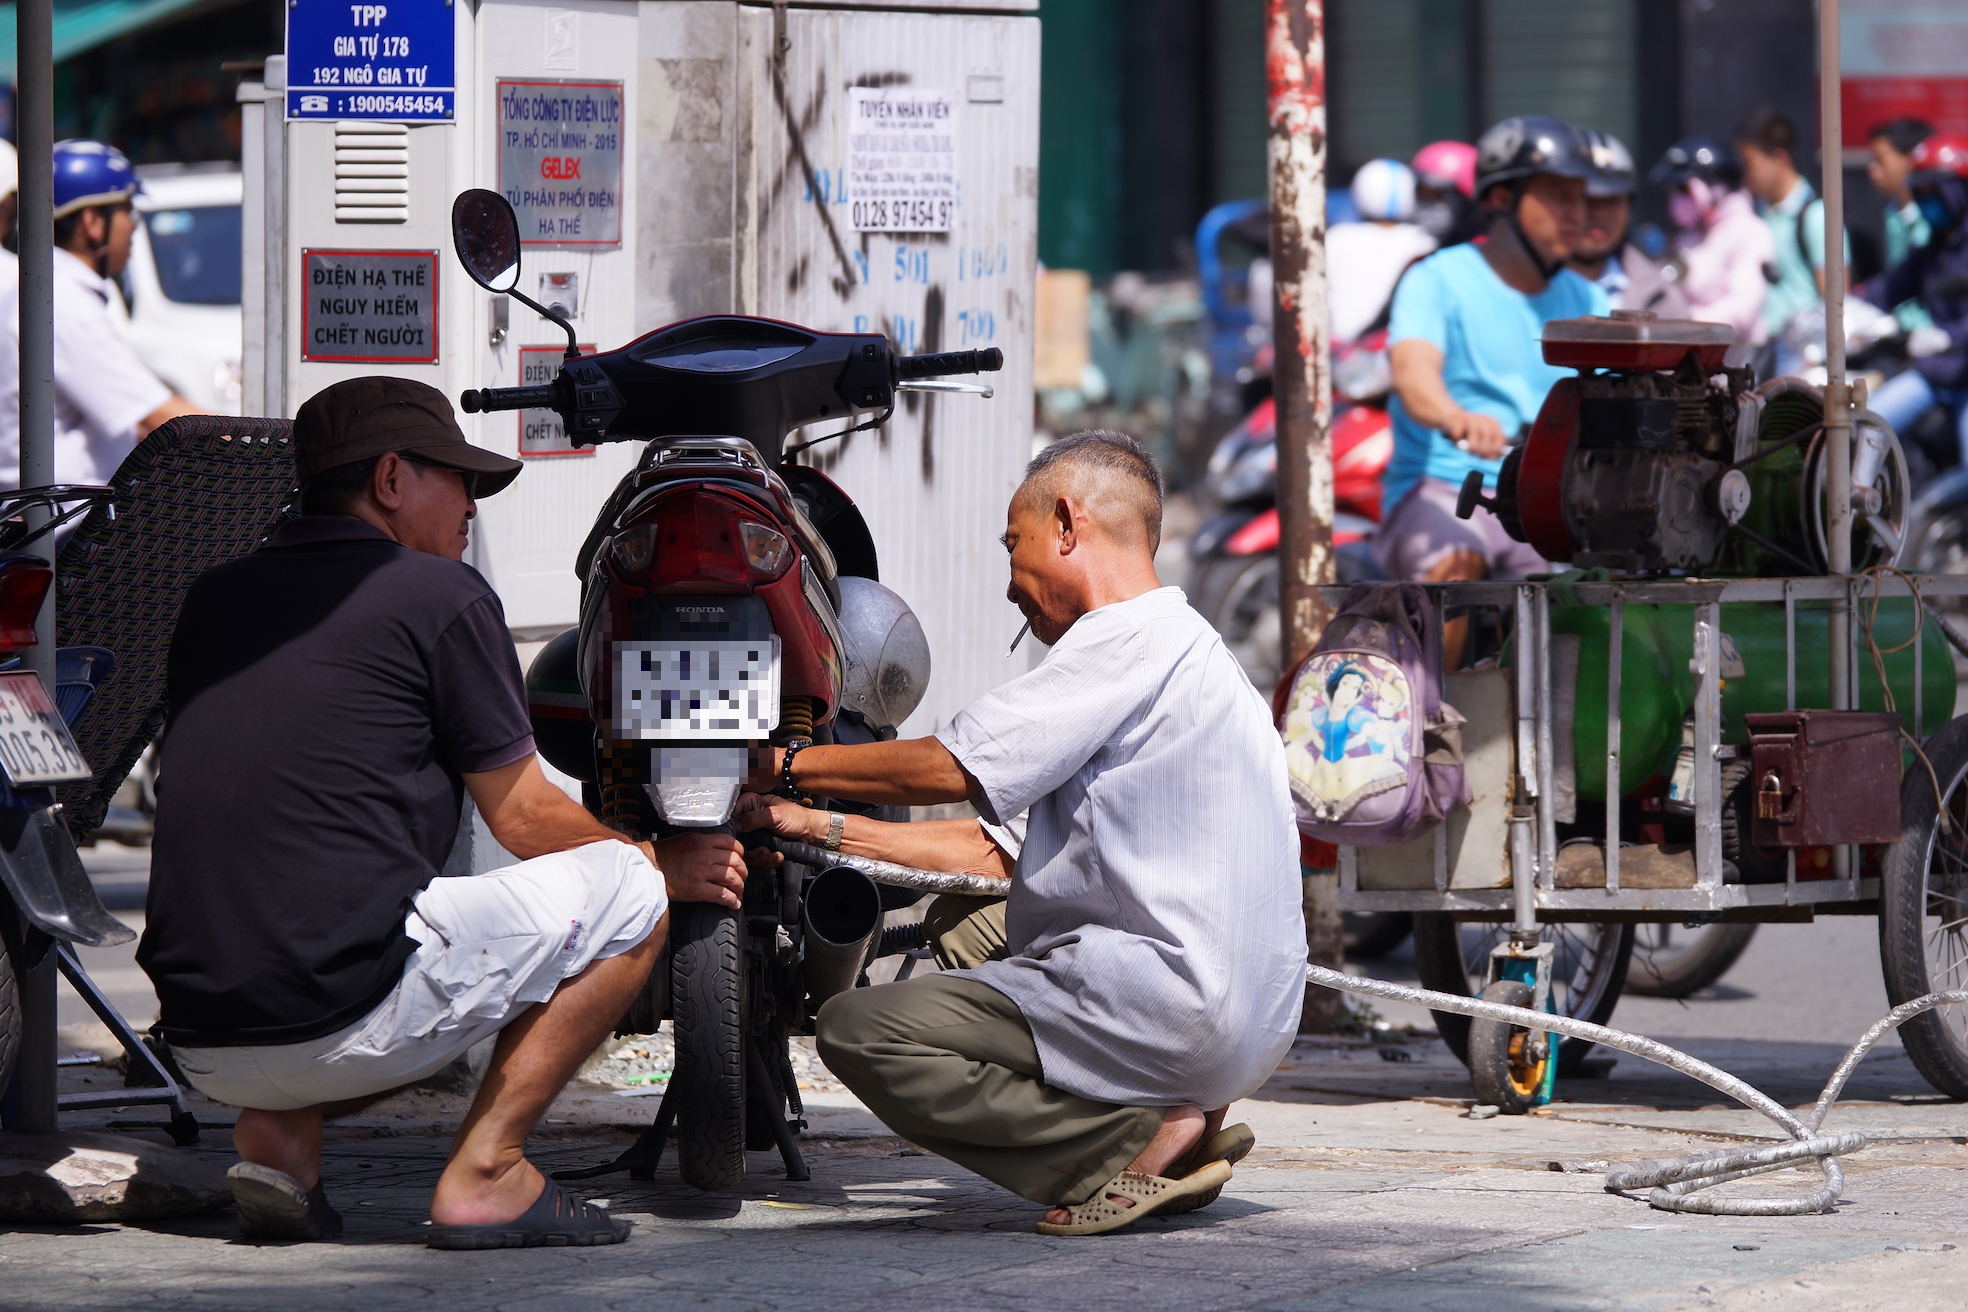 Working as repairmen along busy streets in the motorbike kingdom of Saigon